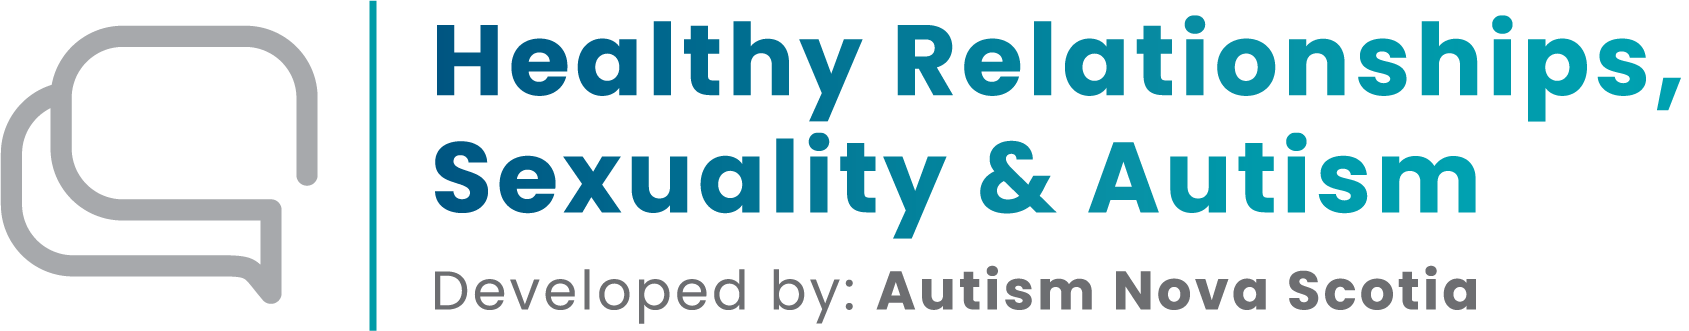 Healthy Relationships, Sexuality & Autism. Developed by Autism Nova Scotia.